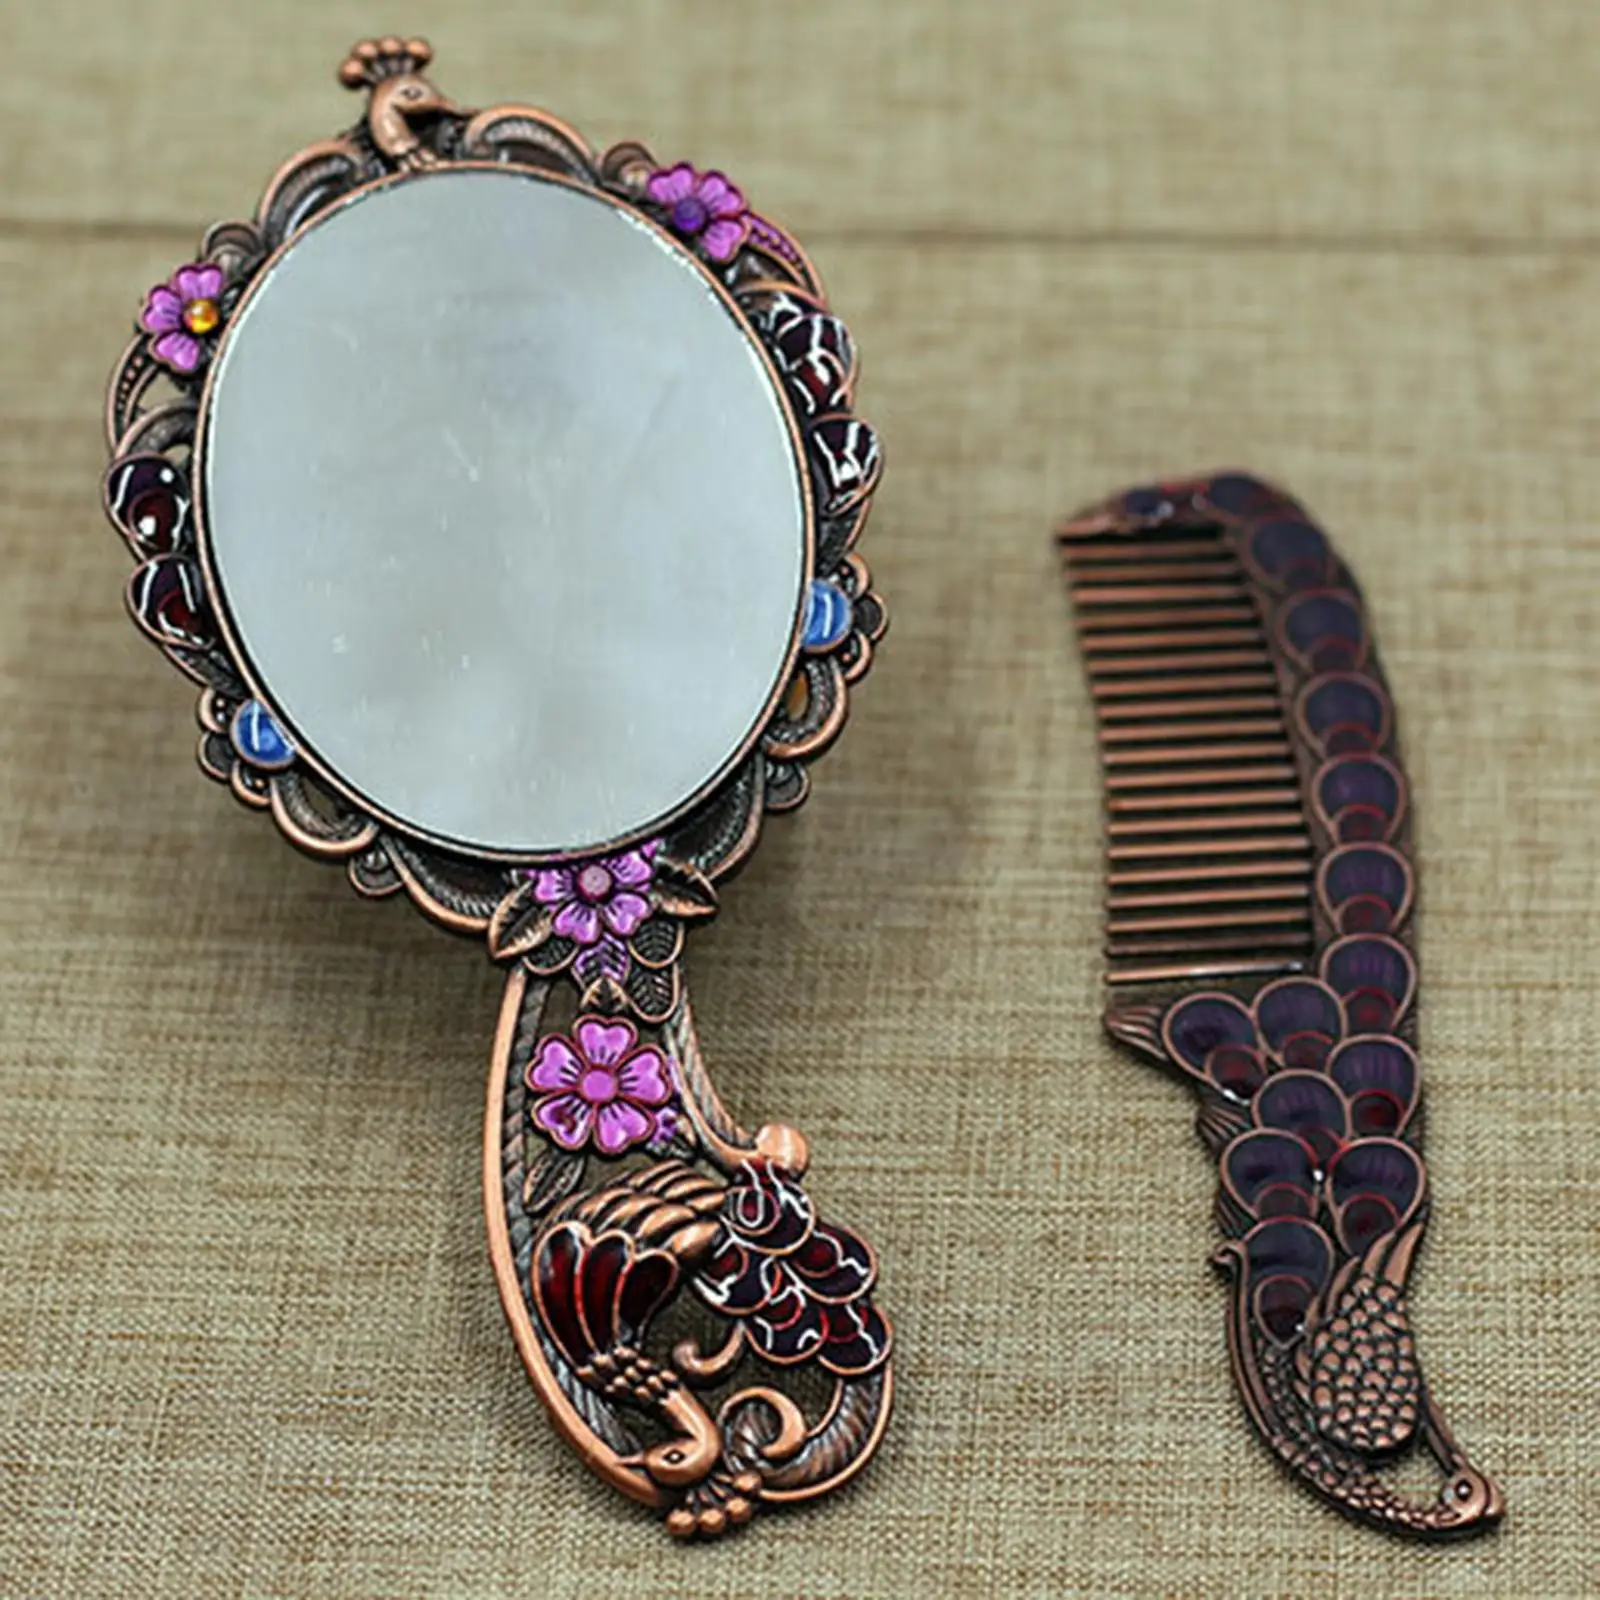 Vintage Style Spreading Tail Embossing Make  Hand Held Comb Set Girl Gift for Women Salon Vanity Mirror Travel